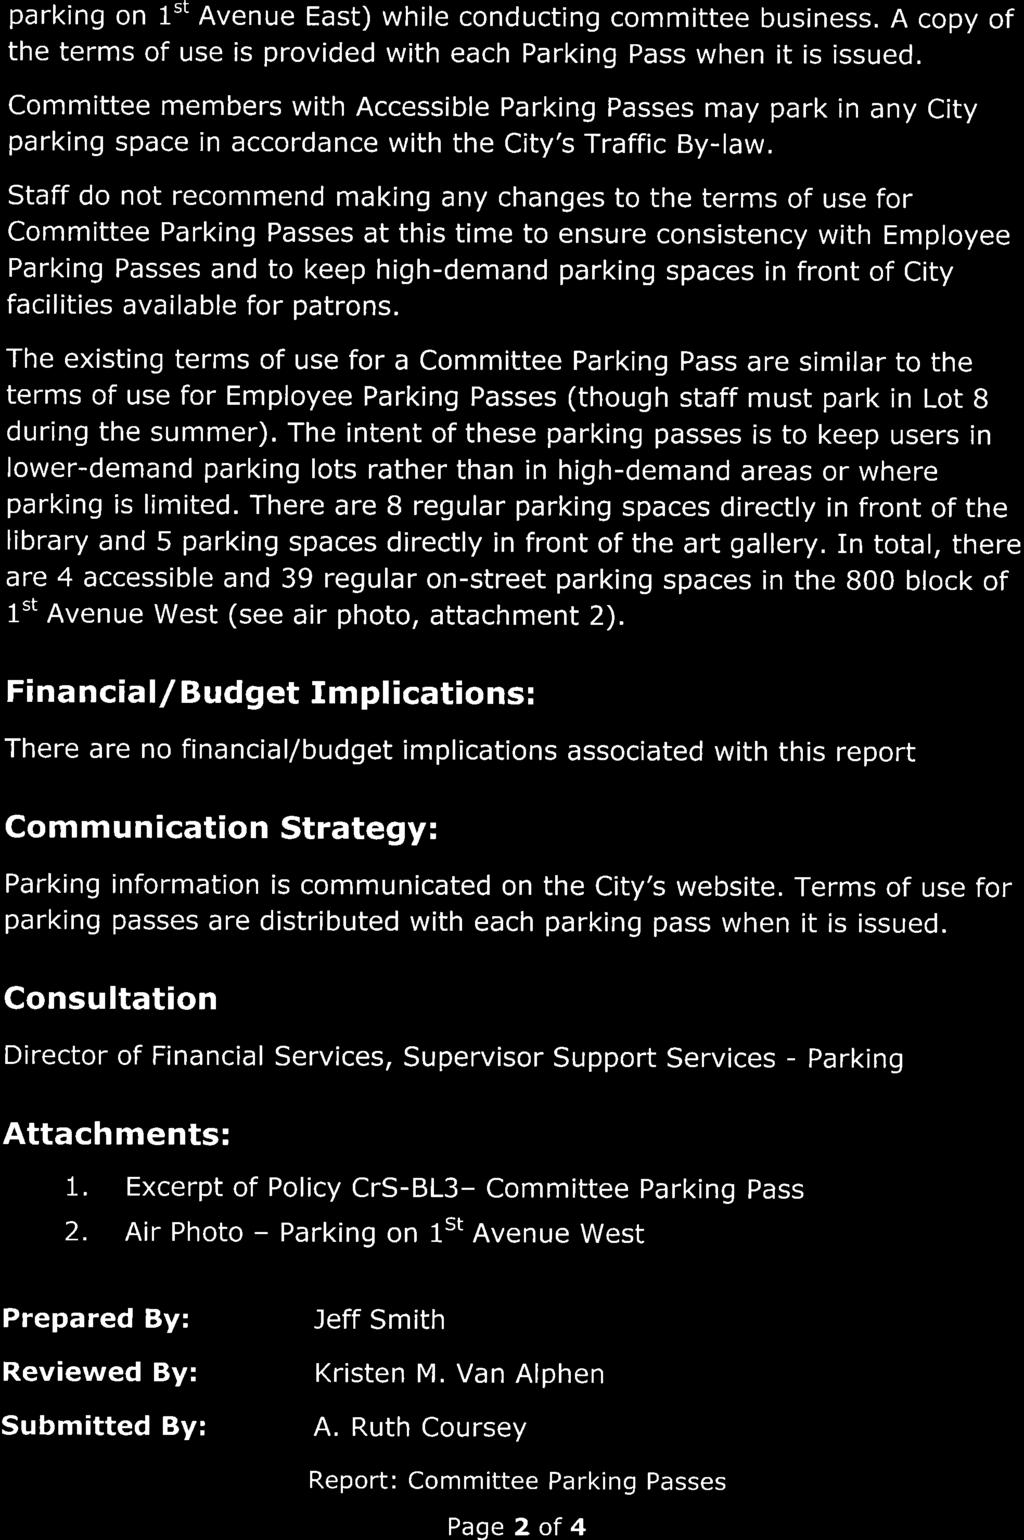 parking on lst Avenue East) while conducting committee business. A copy of the terms of use is provided with each Parking Pass when it is issued.